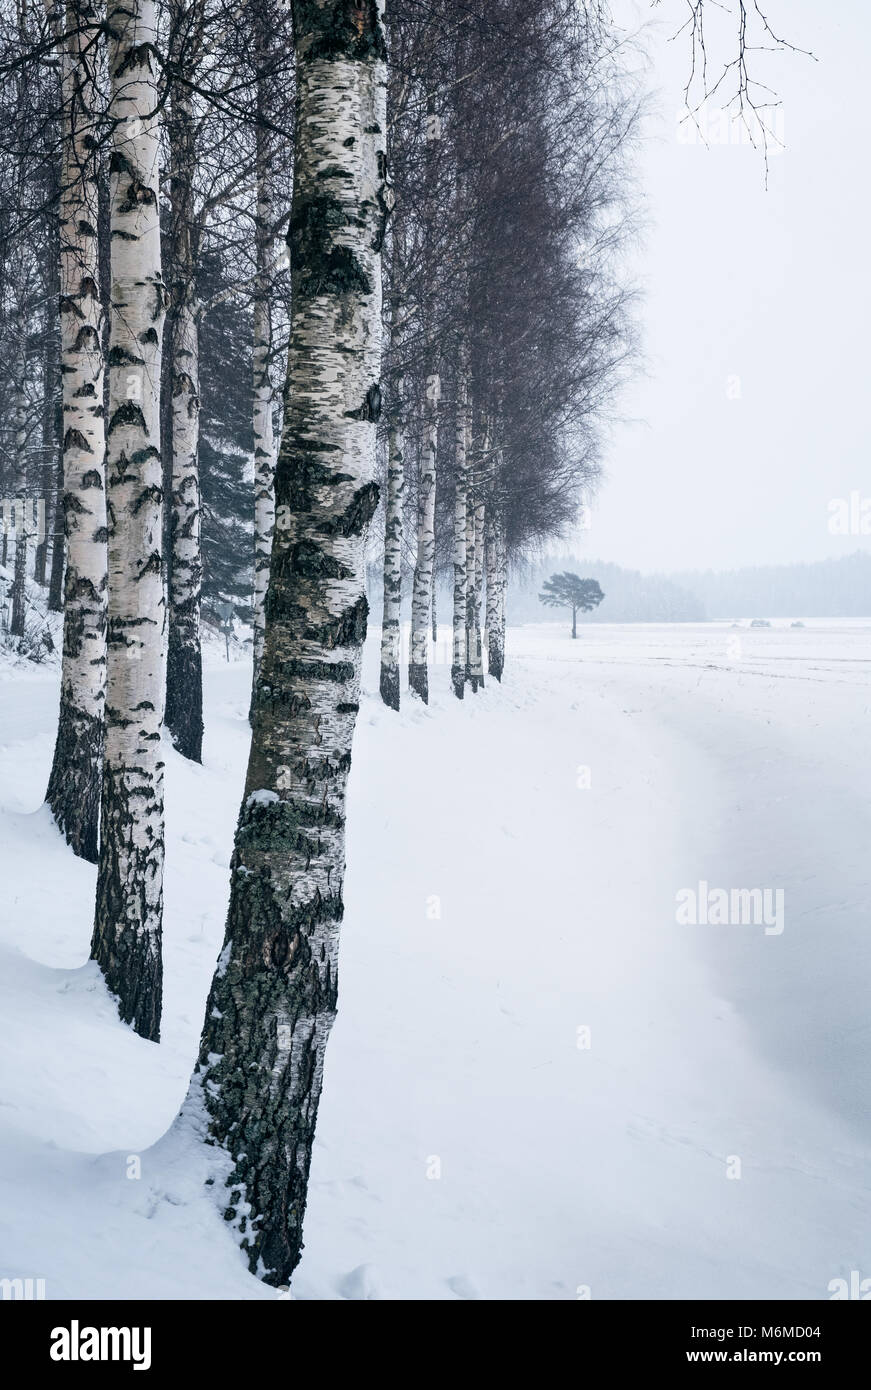 Winter landscape with birch trees and snow at day time in Finland Stock Photo